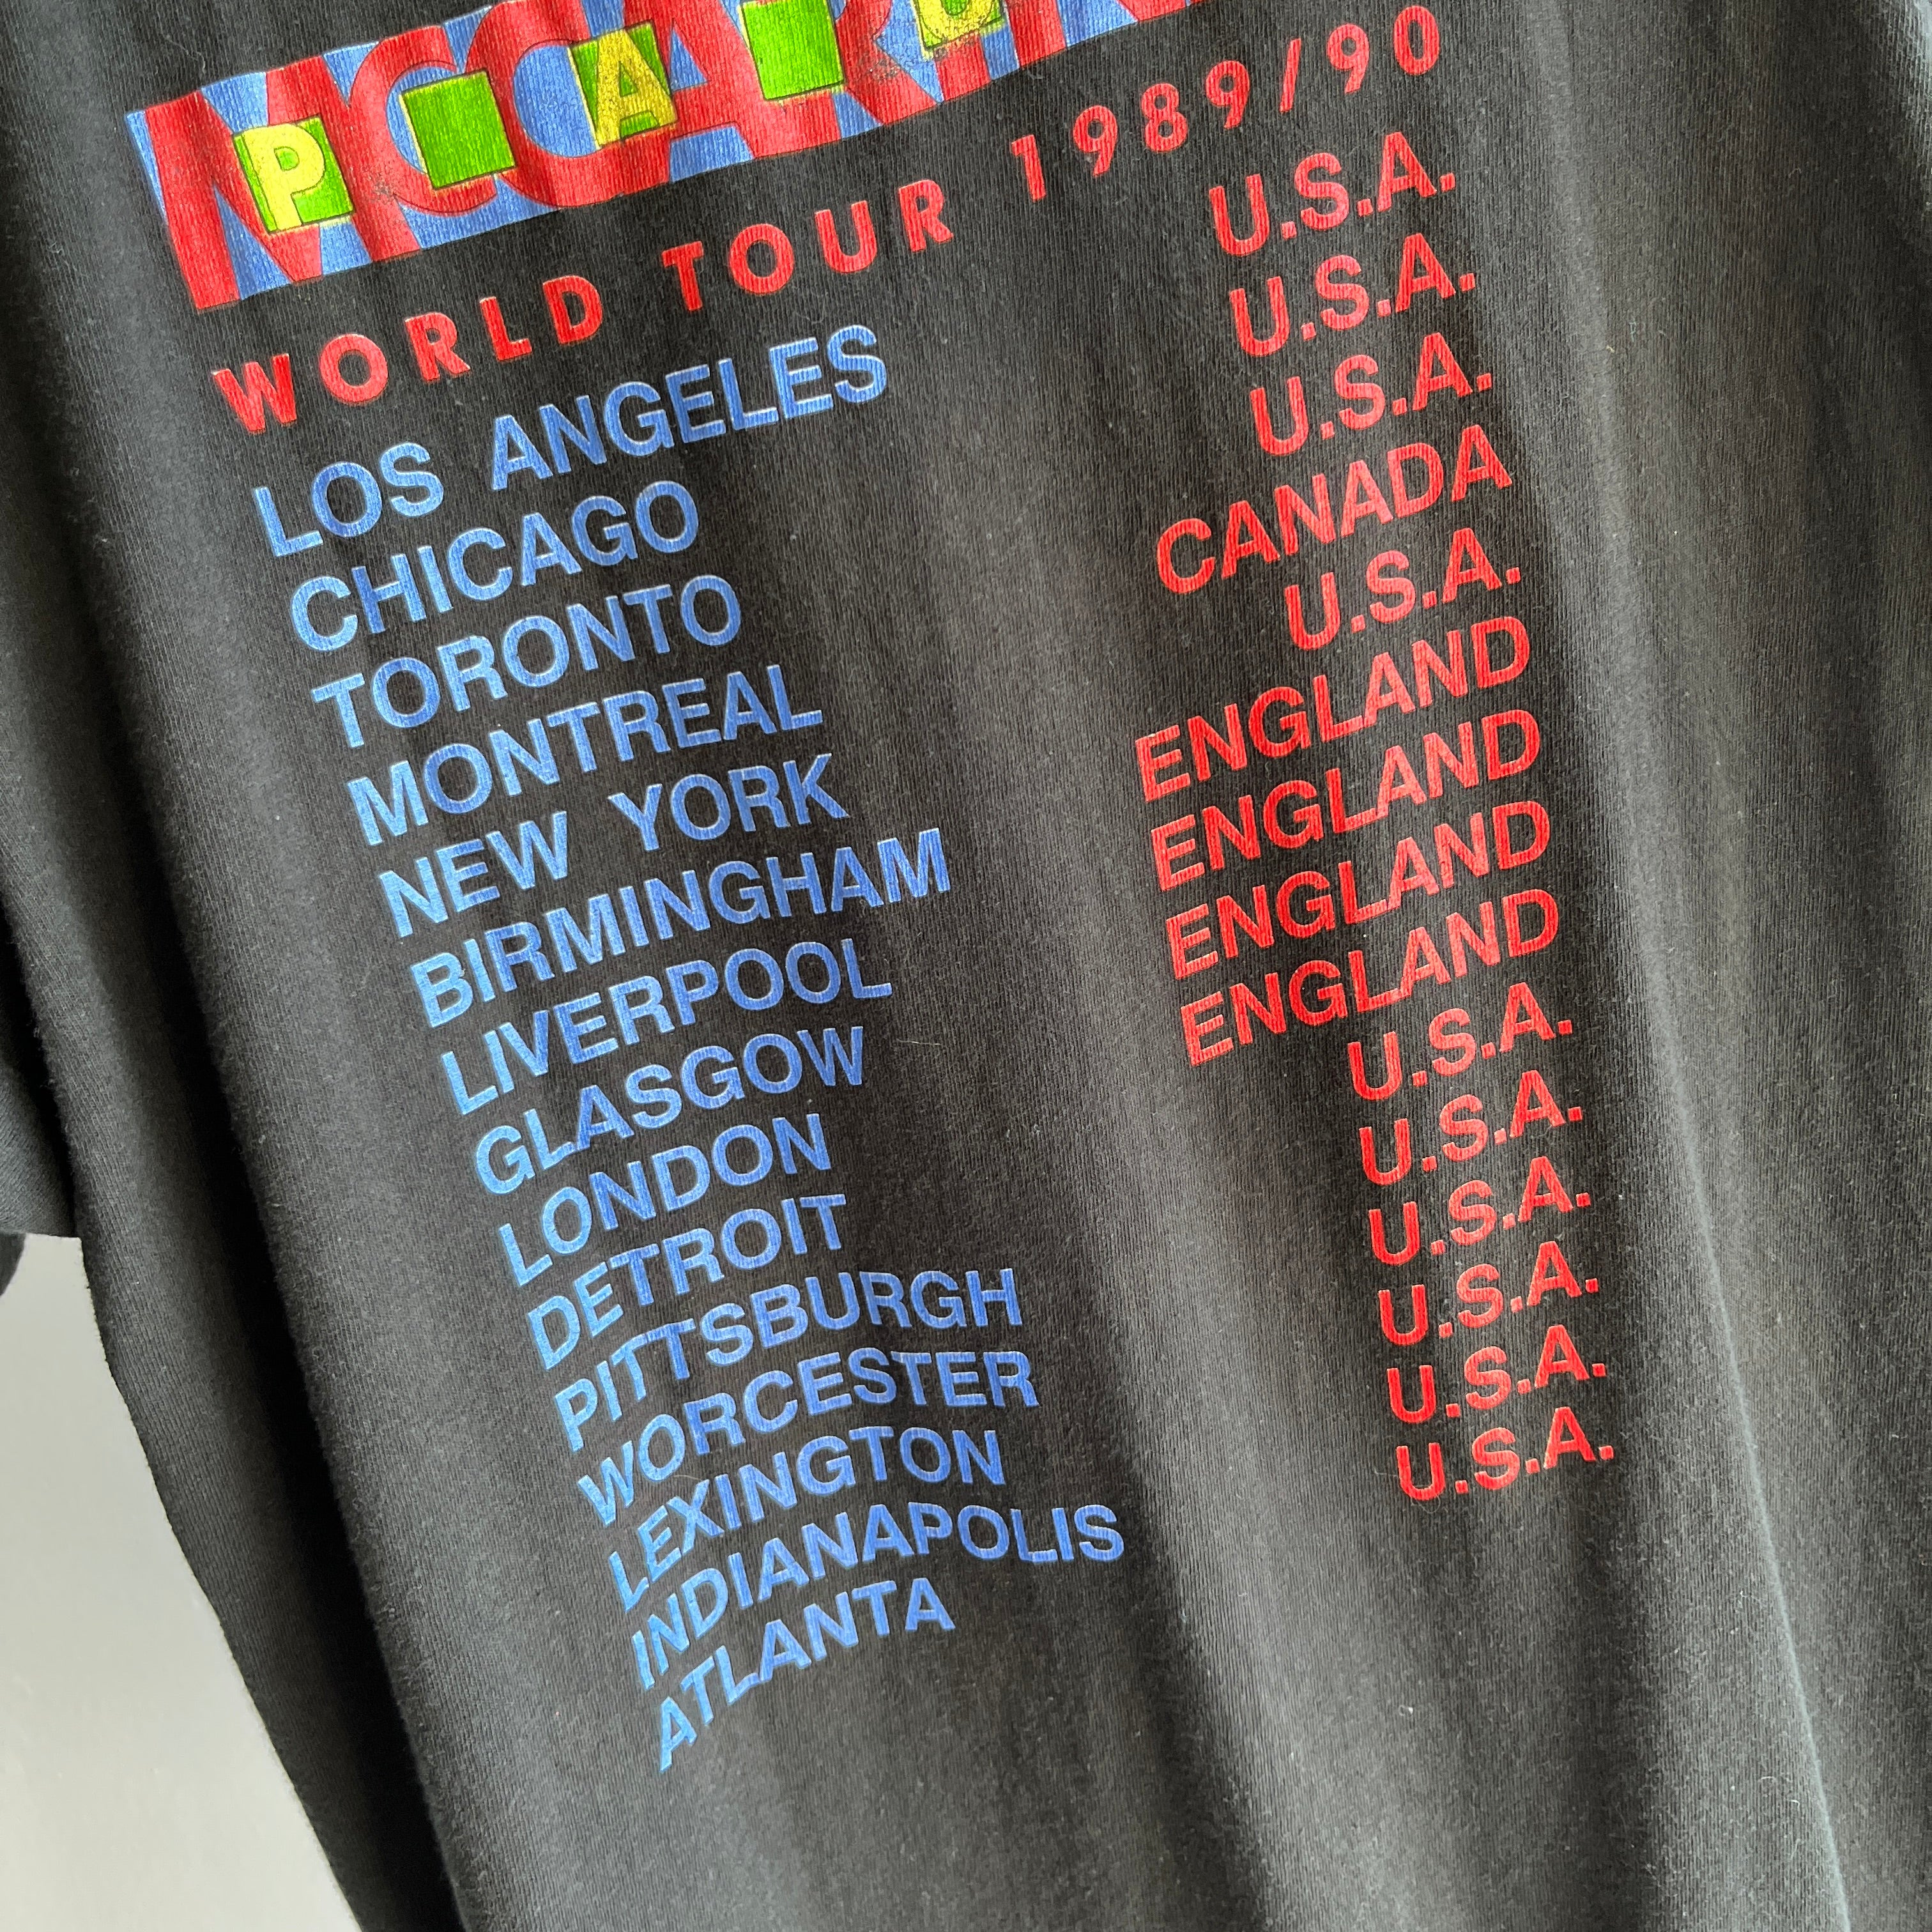 1989/90 Paul McCartney Tour T-Shirt - Front and Back